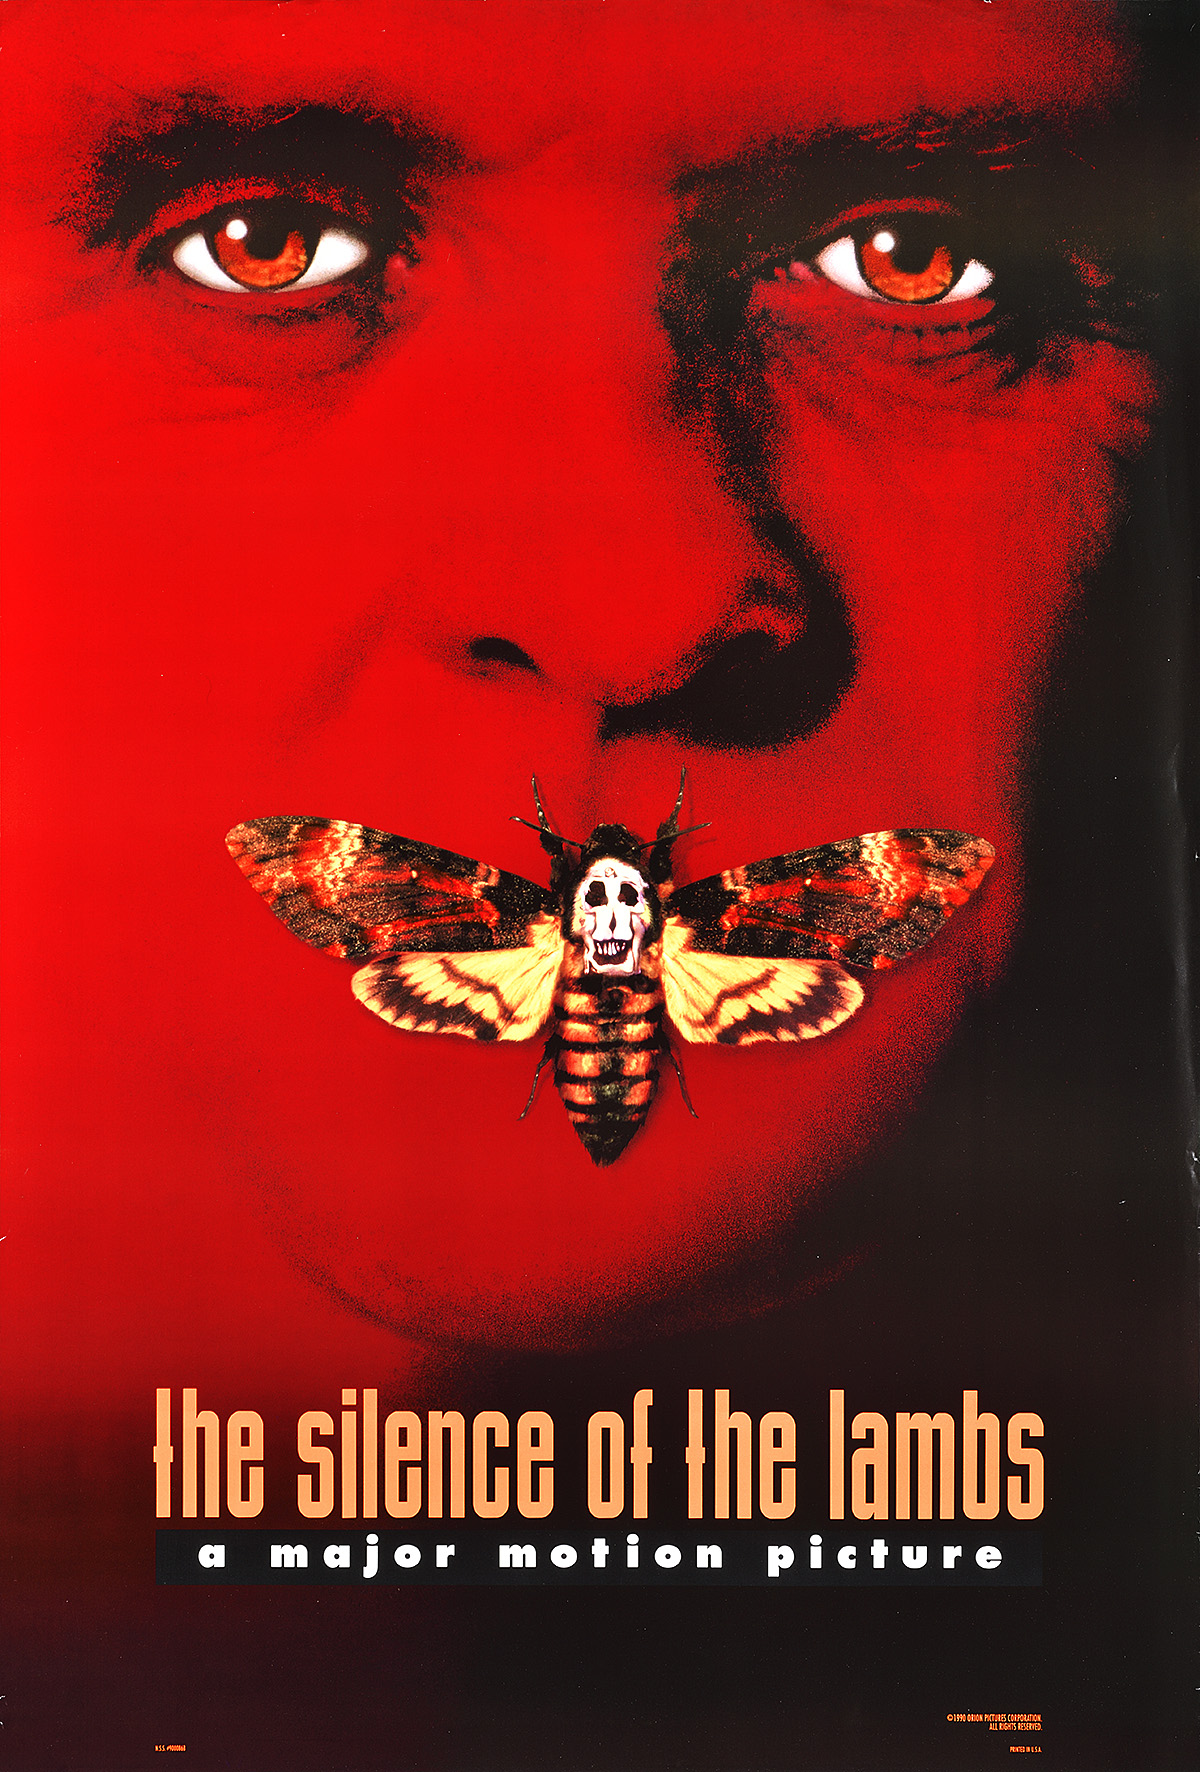 A red poster of a middle aged man's face with red eyes and a moth covering his mouth.